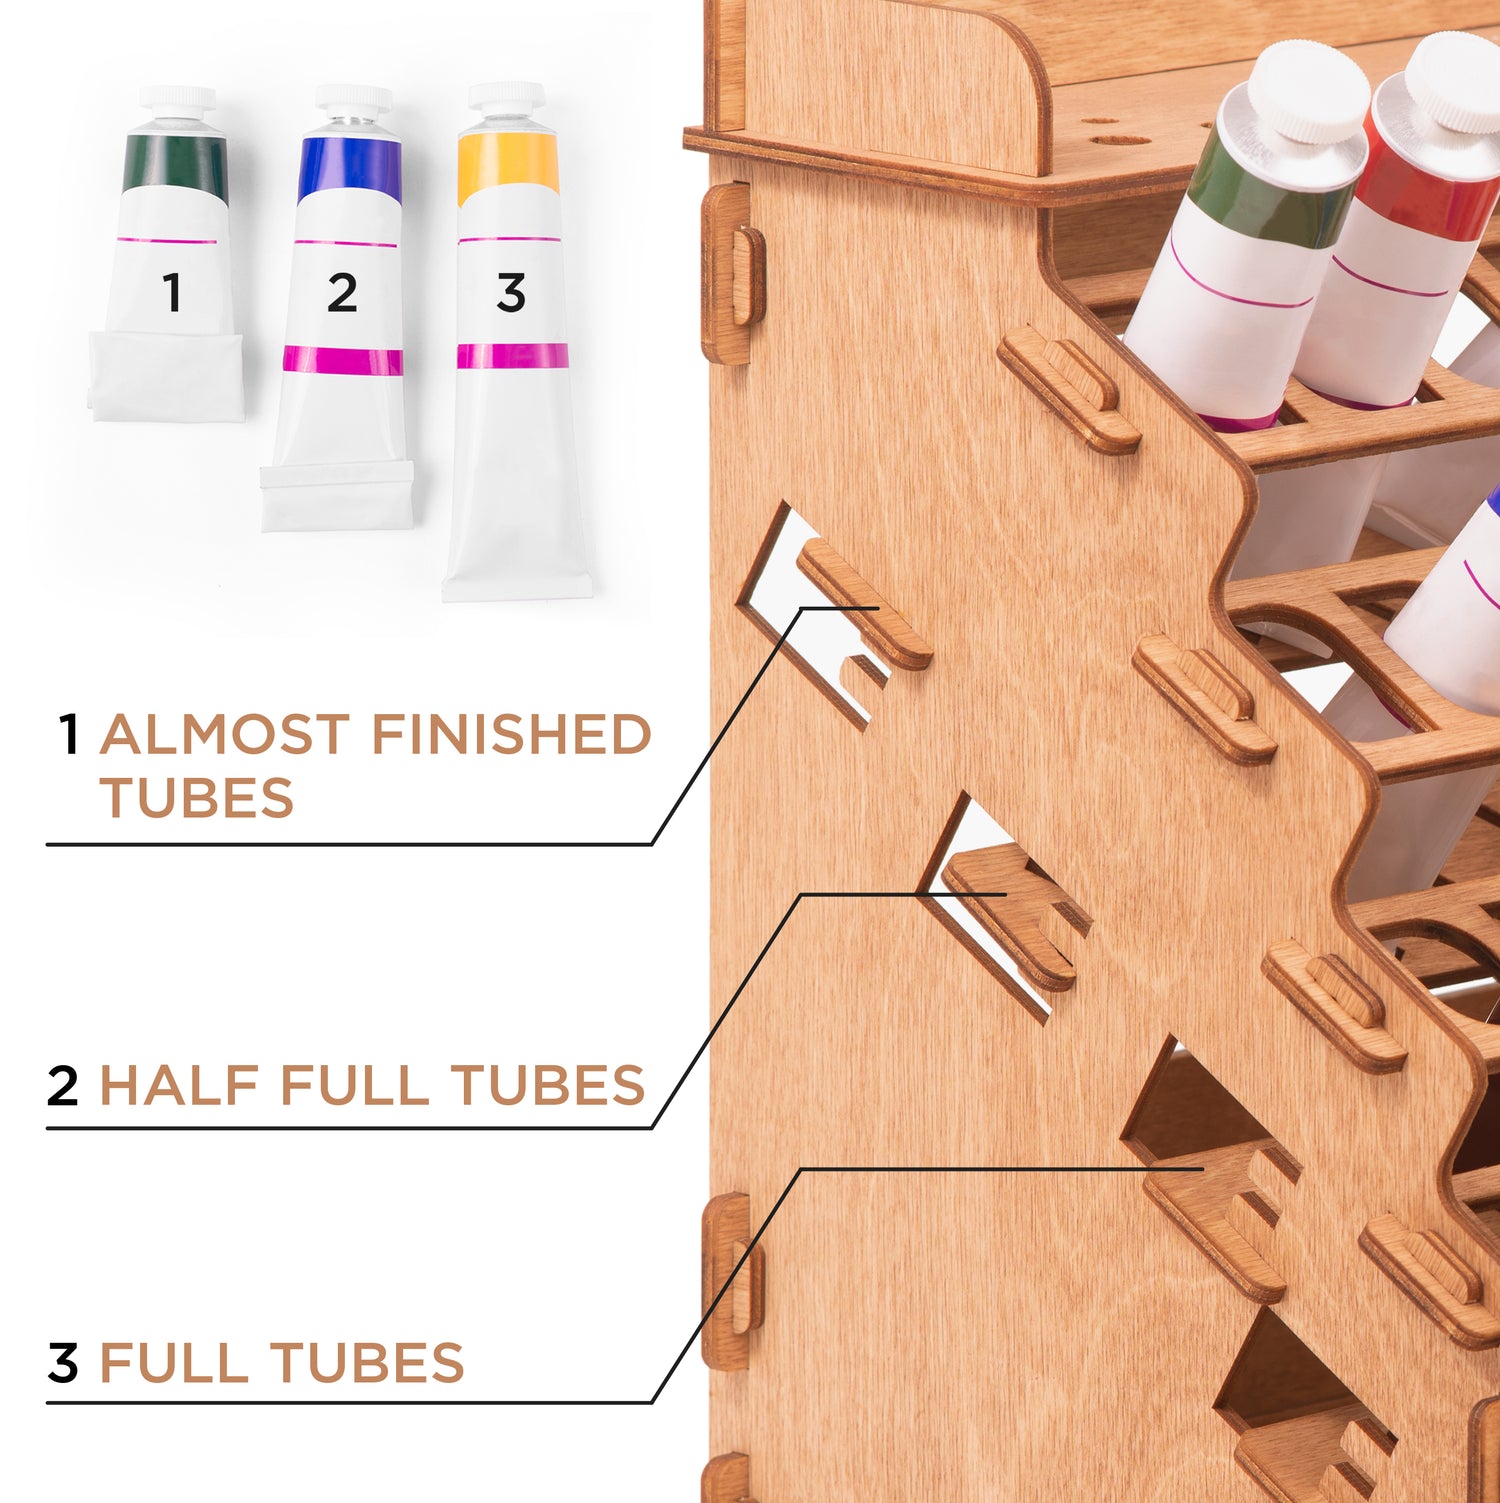 Plydolex Modular Paint Rack: Looks, Smells, and More (Review) - Tangible Day